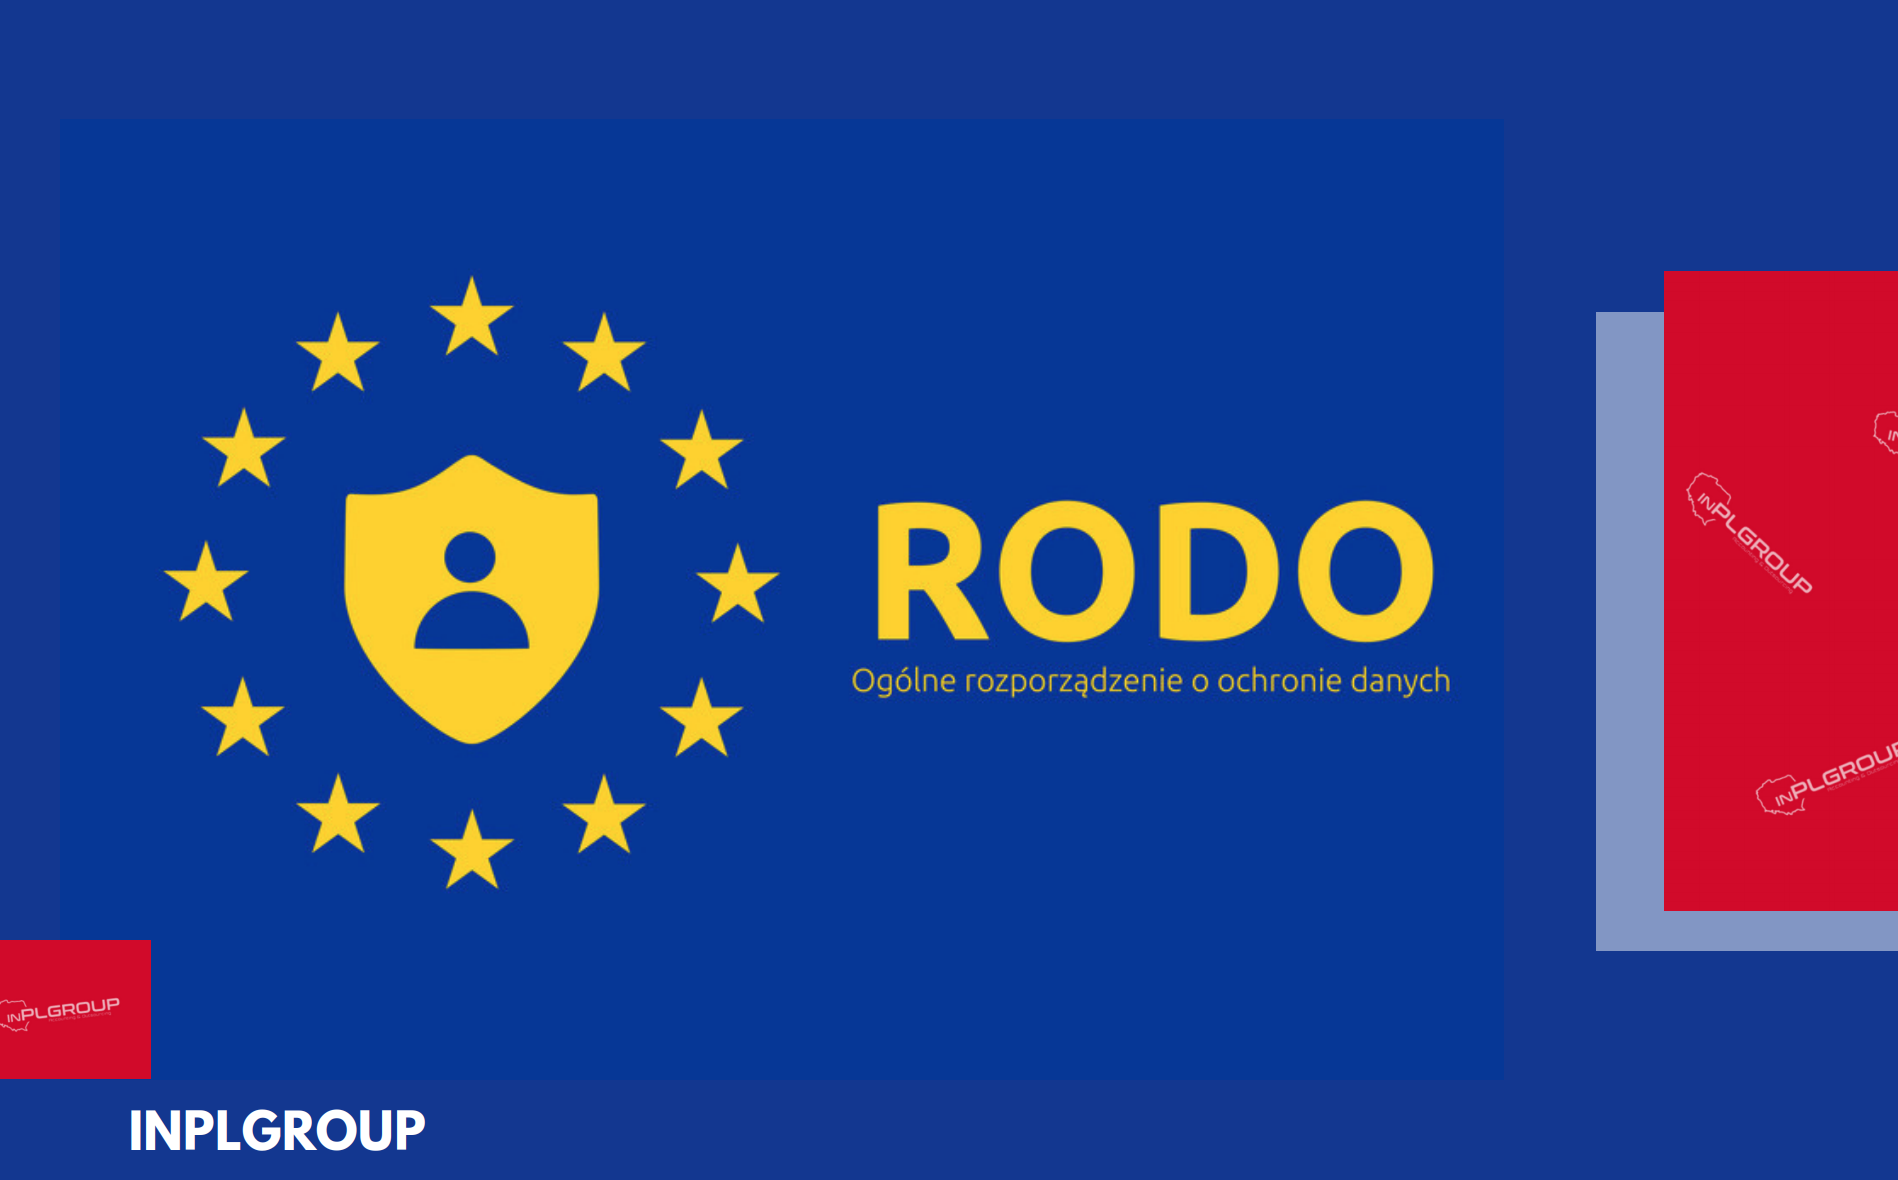 What is RODO?